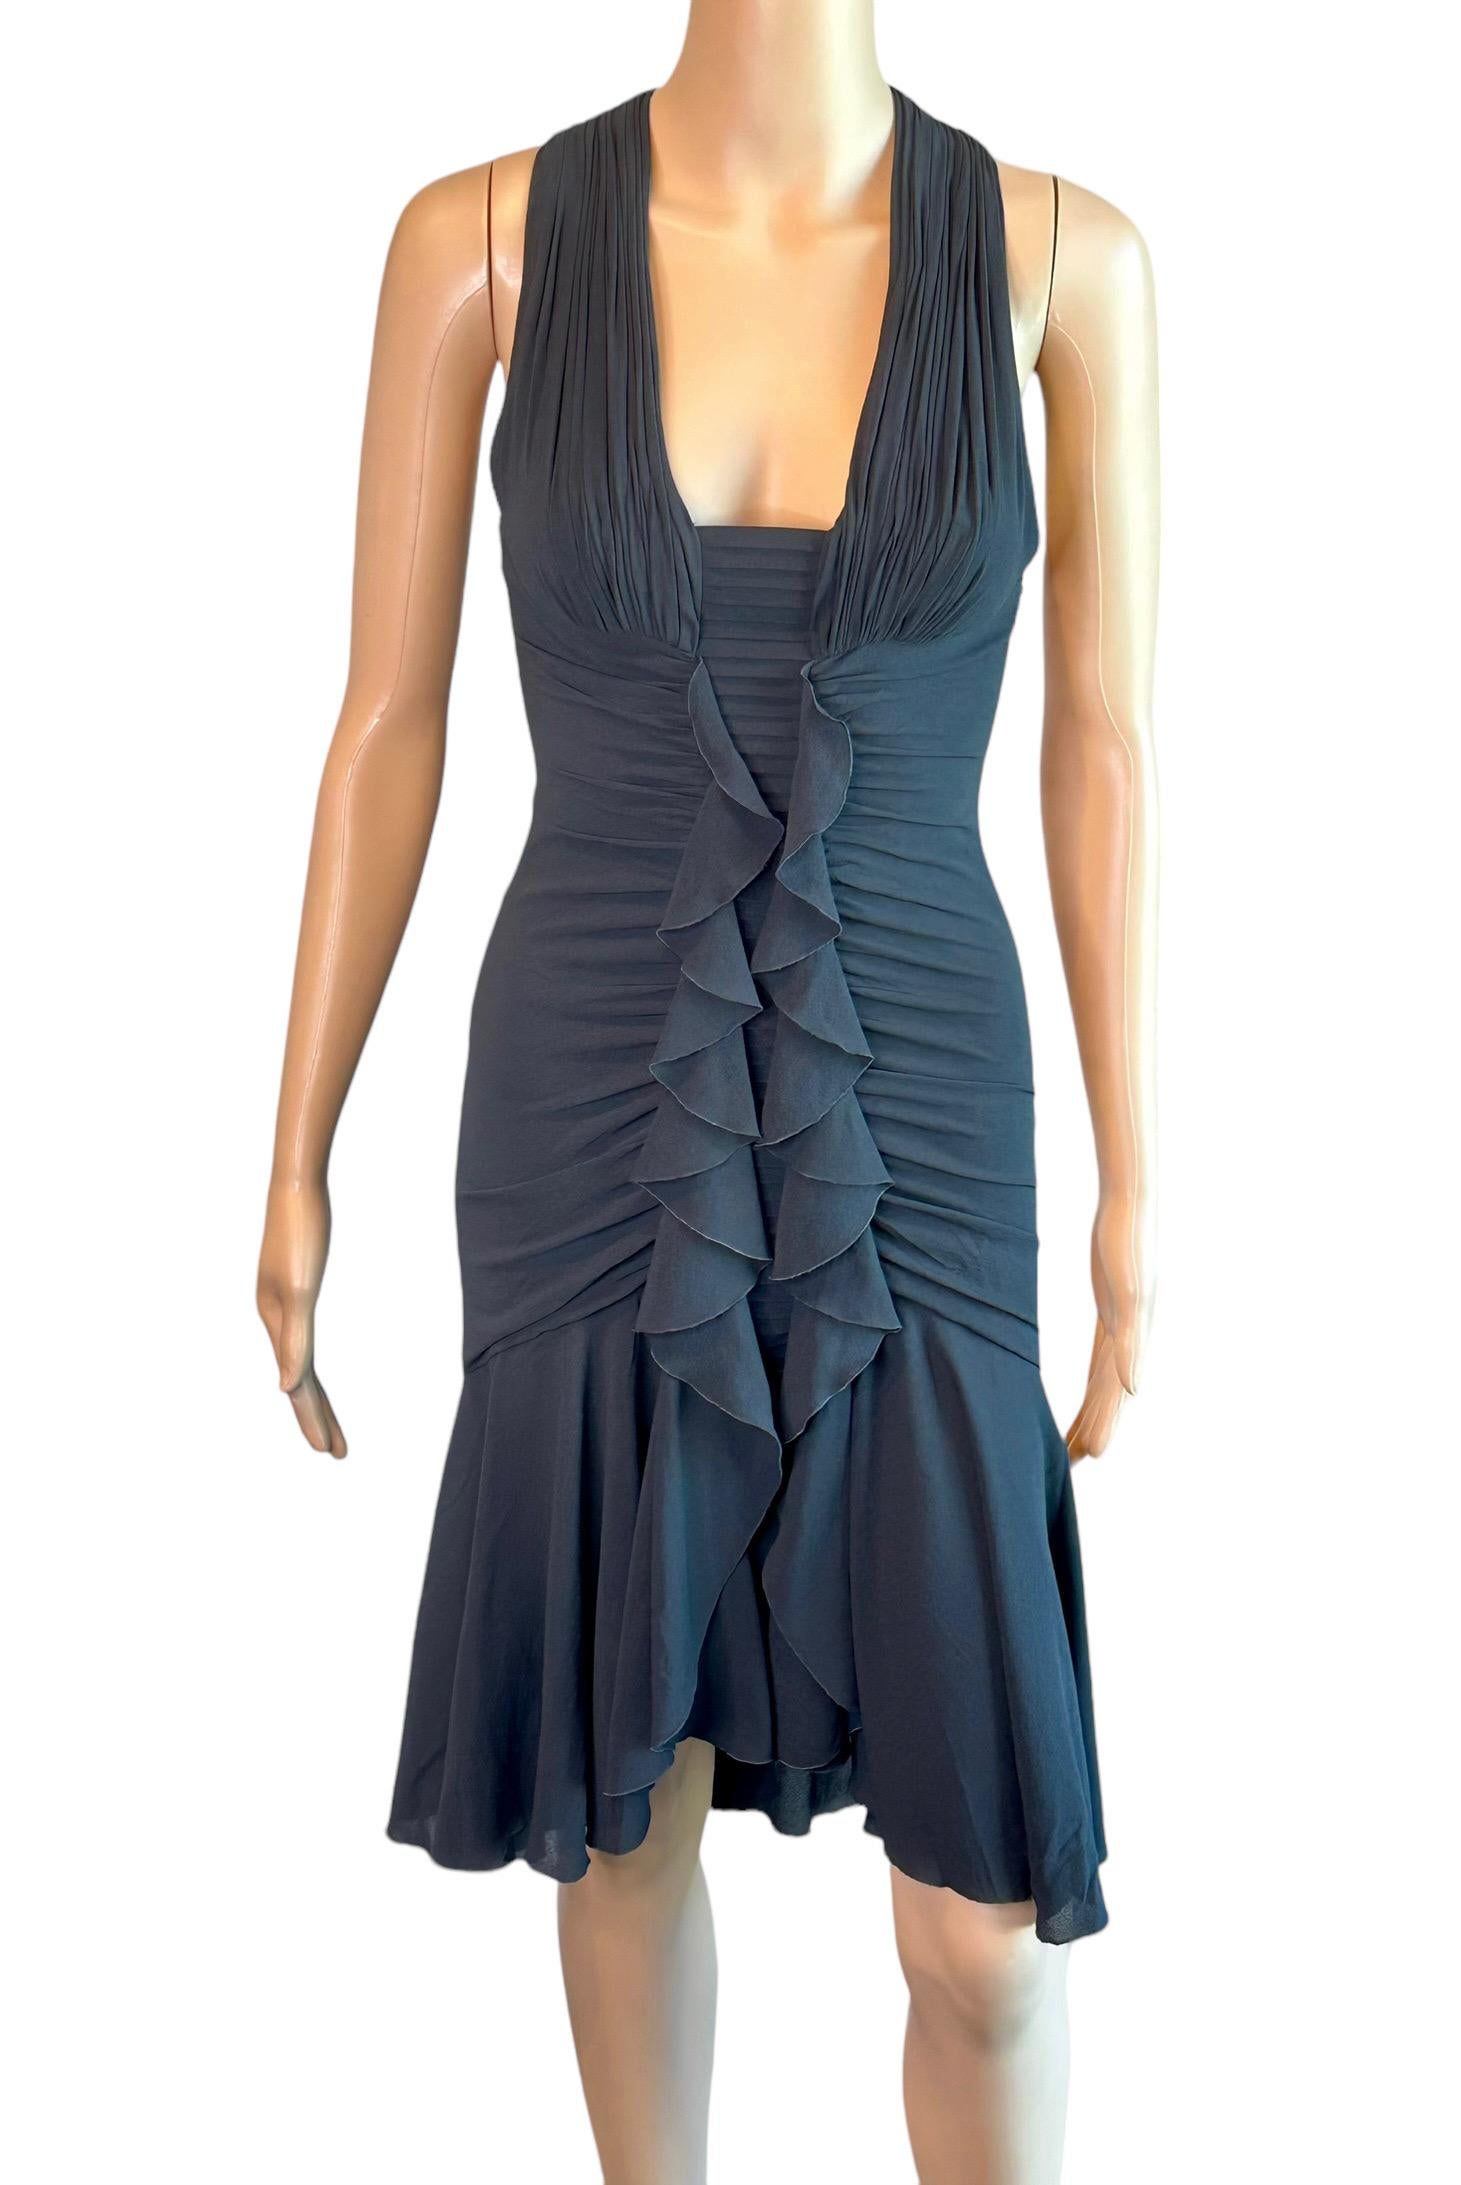 Versace F/W 2006 Plunging Ruched Ruffles Black Dress For Sale 3